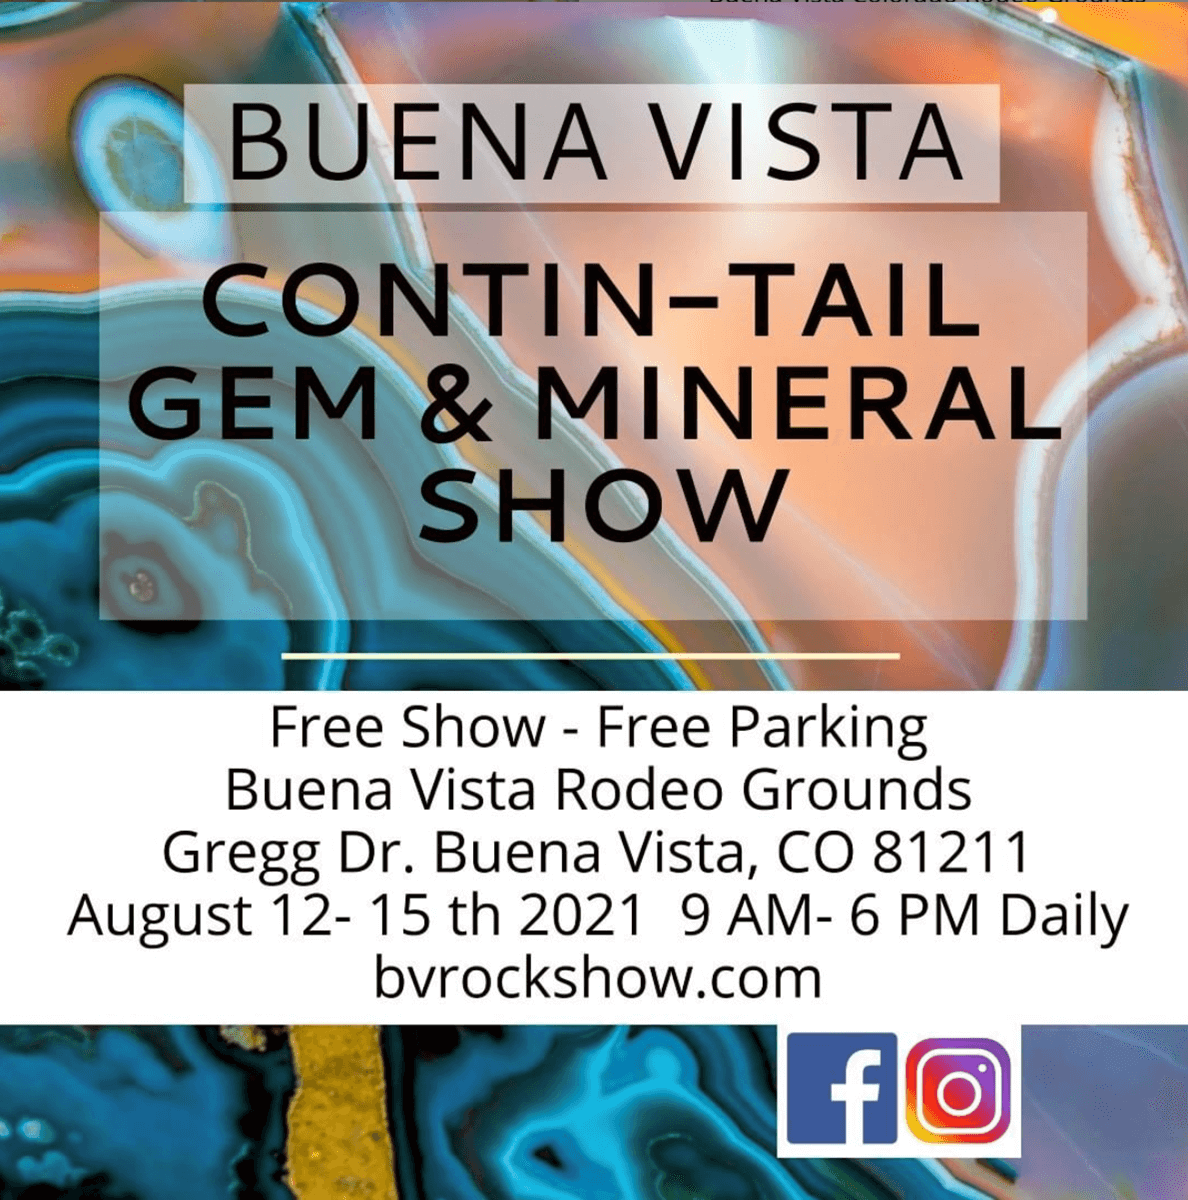 Buena Vista Contin-Tail Show, August 12-15, Largest Outdoor Mineral and Fossil Show in Colorado